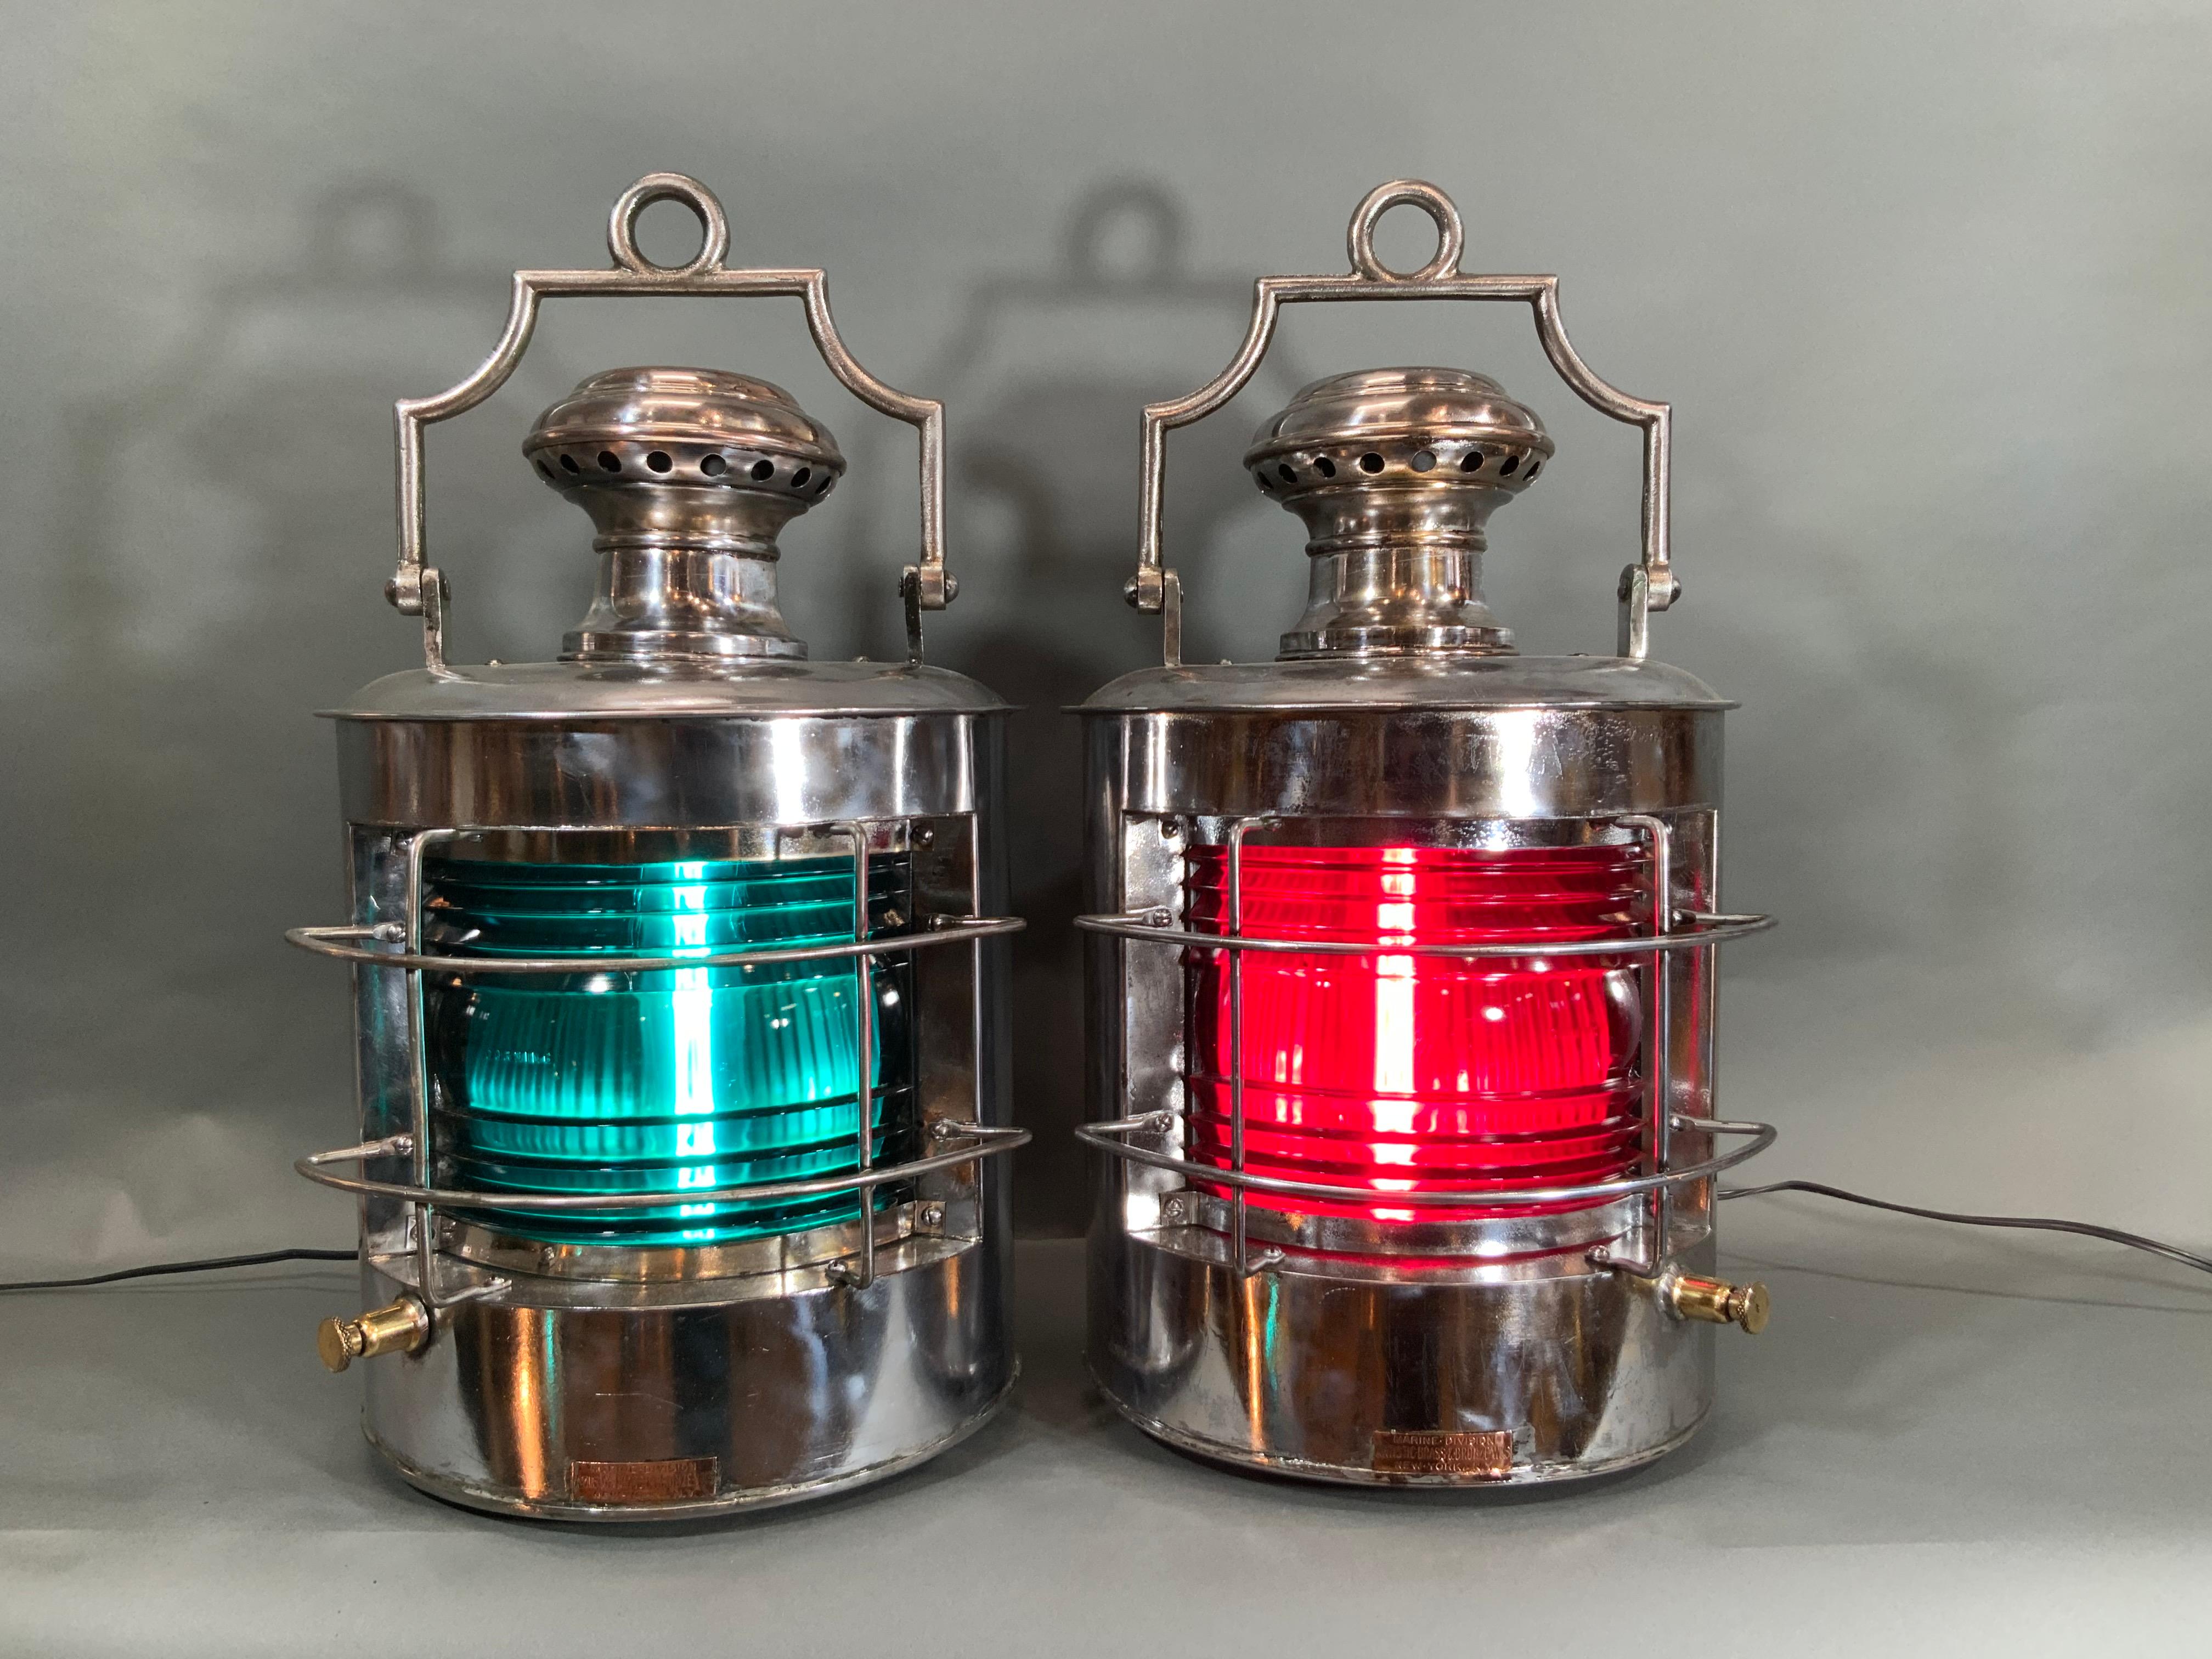 Pair of ship's lanterns, port and starboard, with polished steel cases that have been stripped and meticulously polished and lacquered. This is a first class pair of lanterns with copper badges from Marine Division Artistic Brass and Bronze Works of